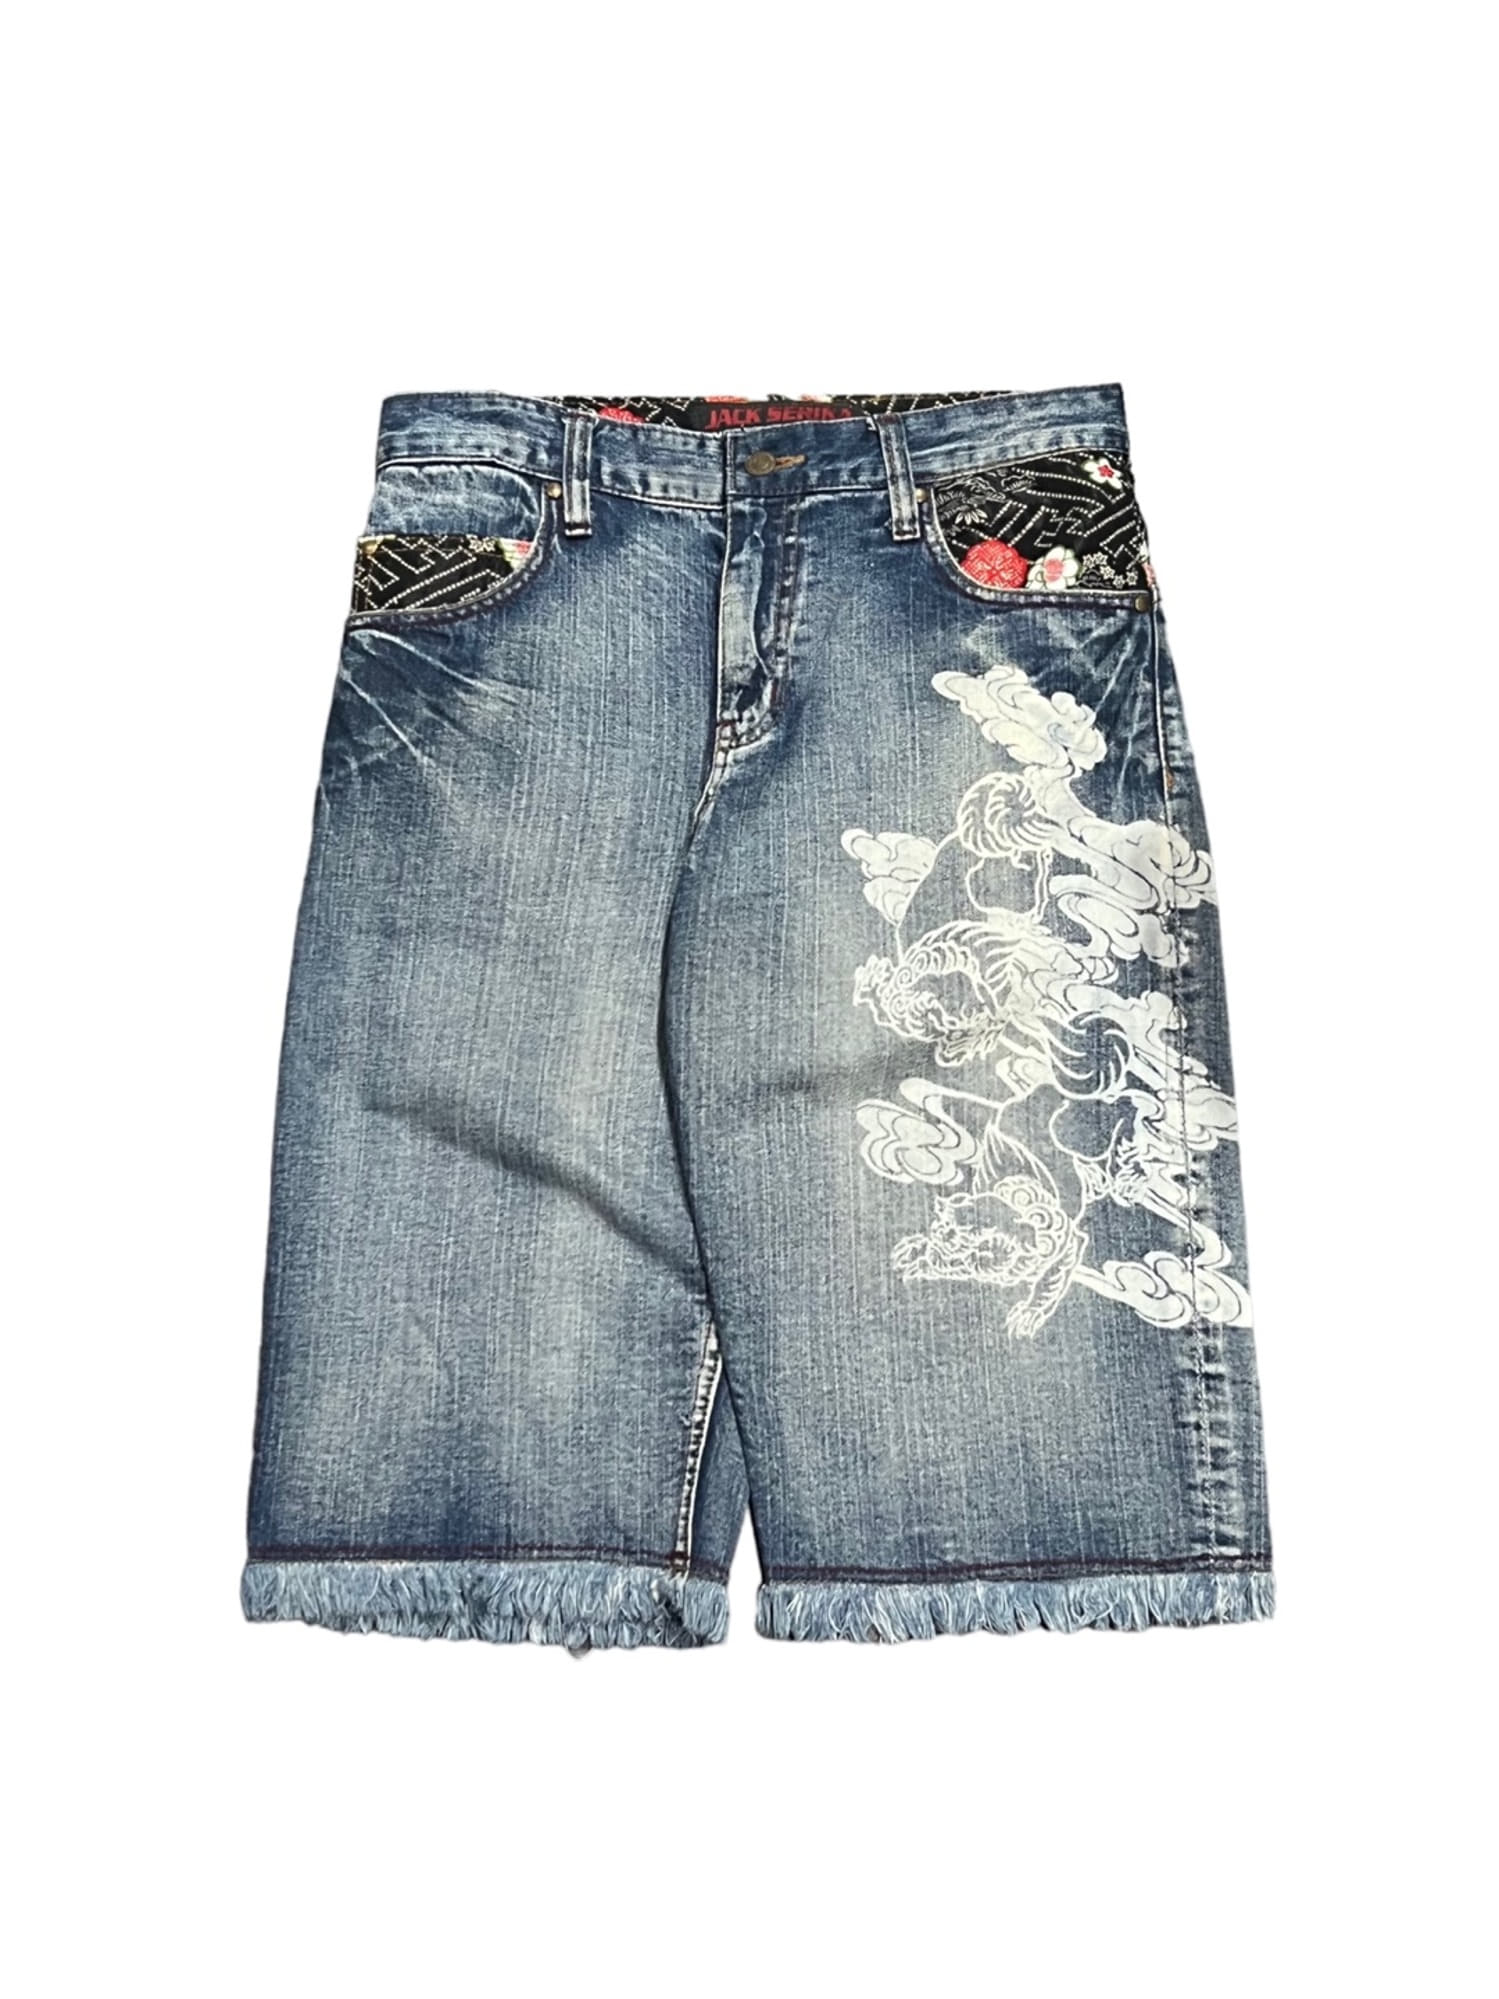 Japanese Oriental Embroidery Size Remake Half Pants